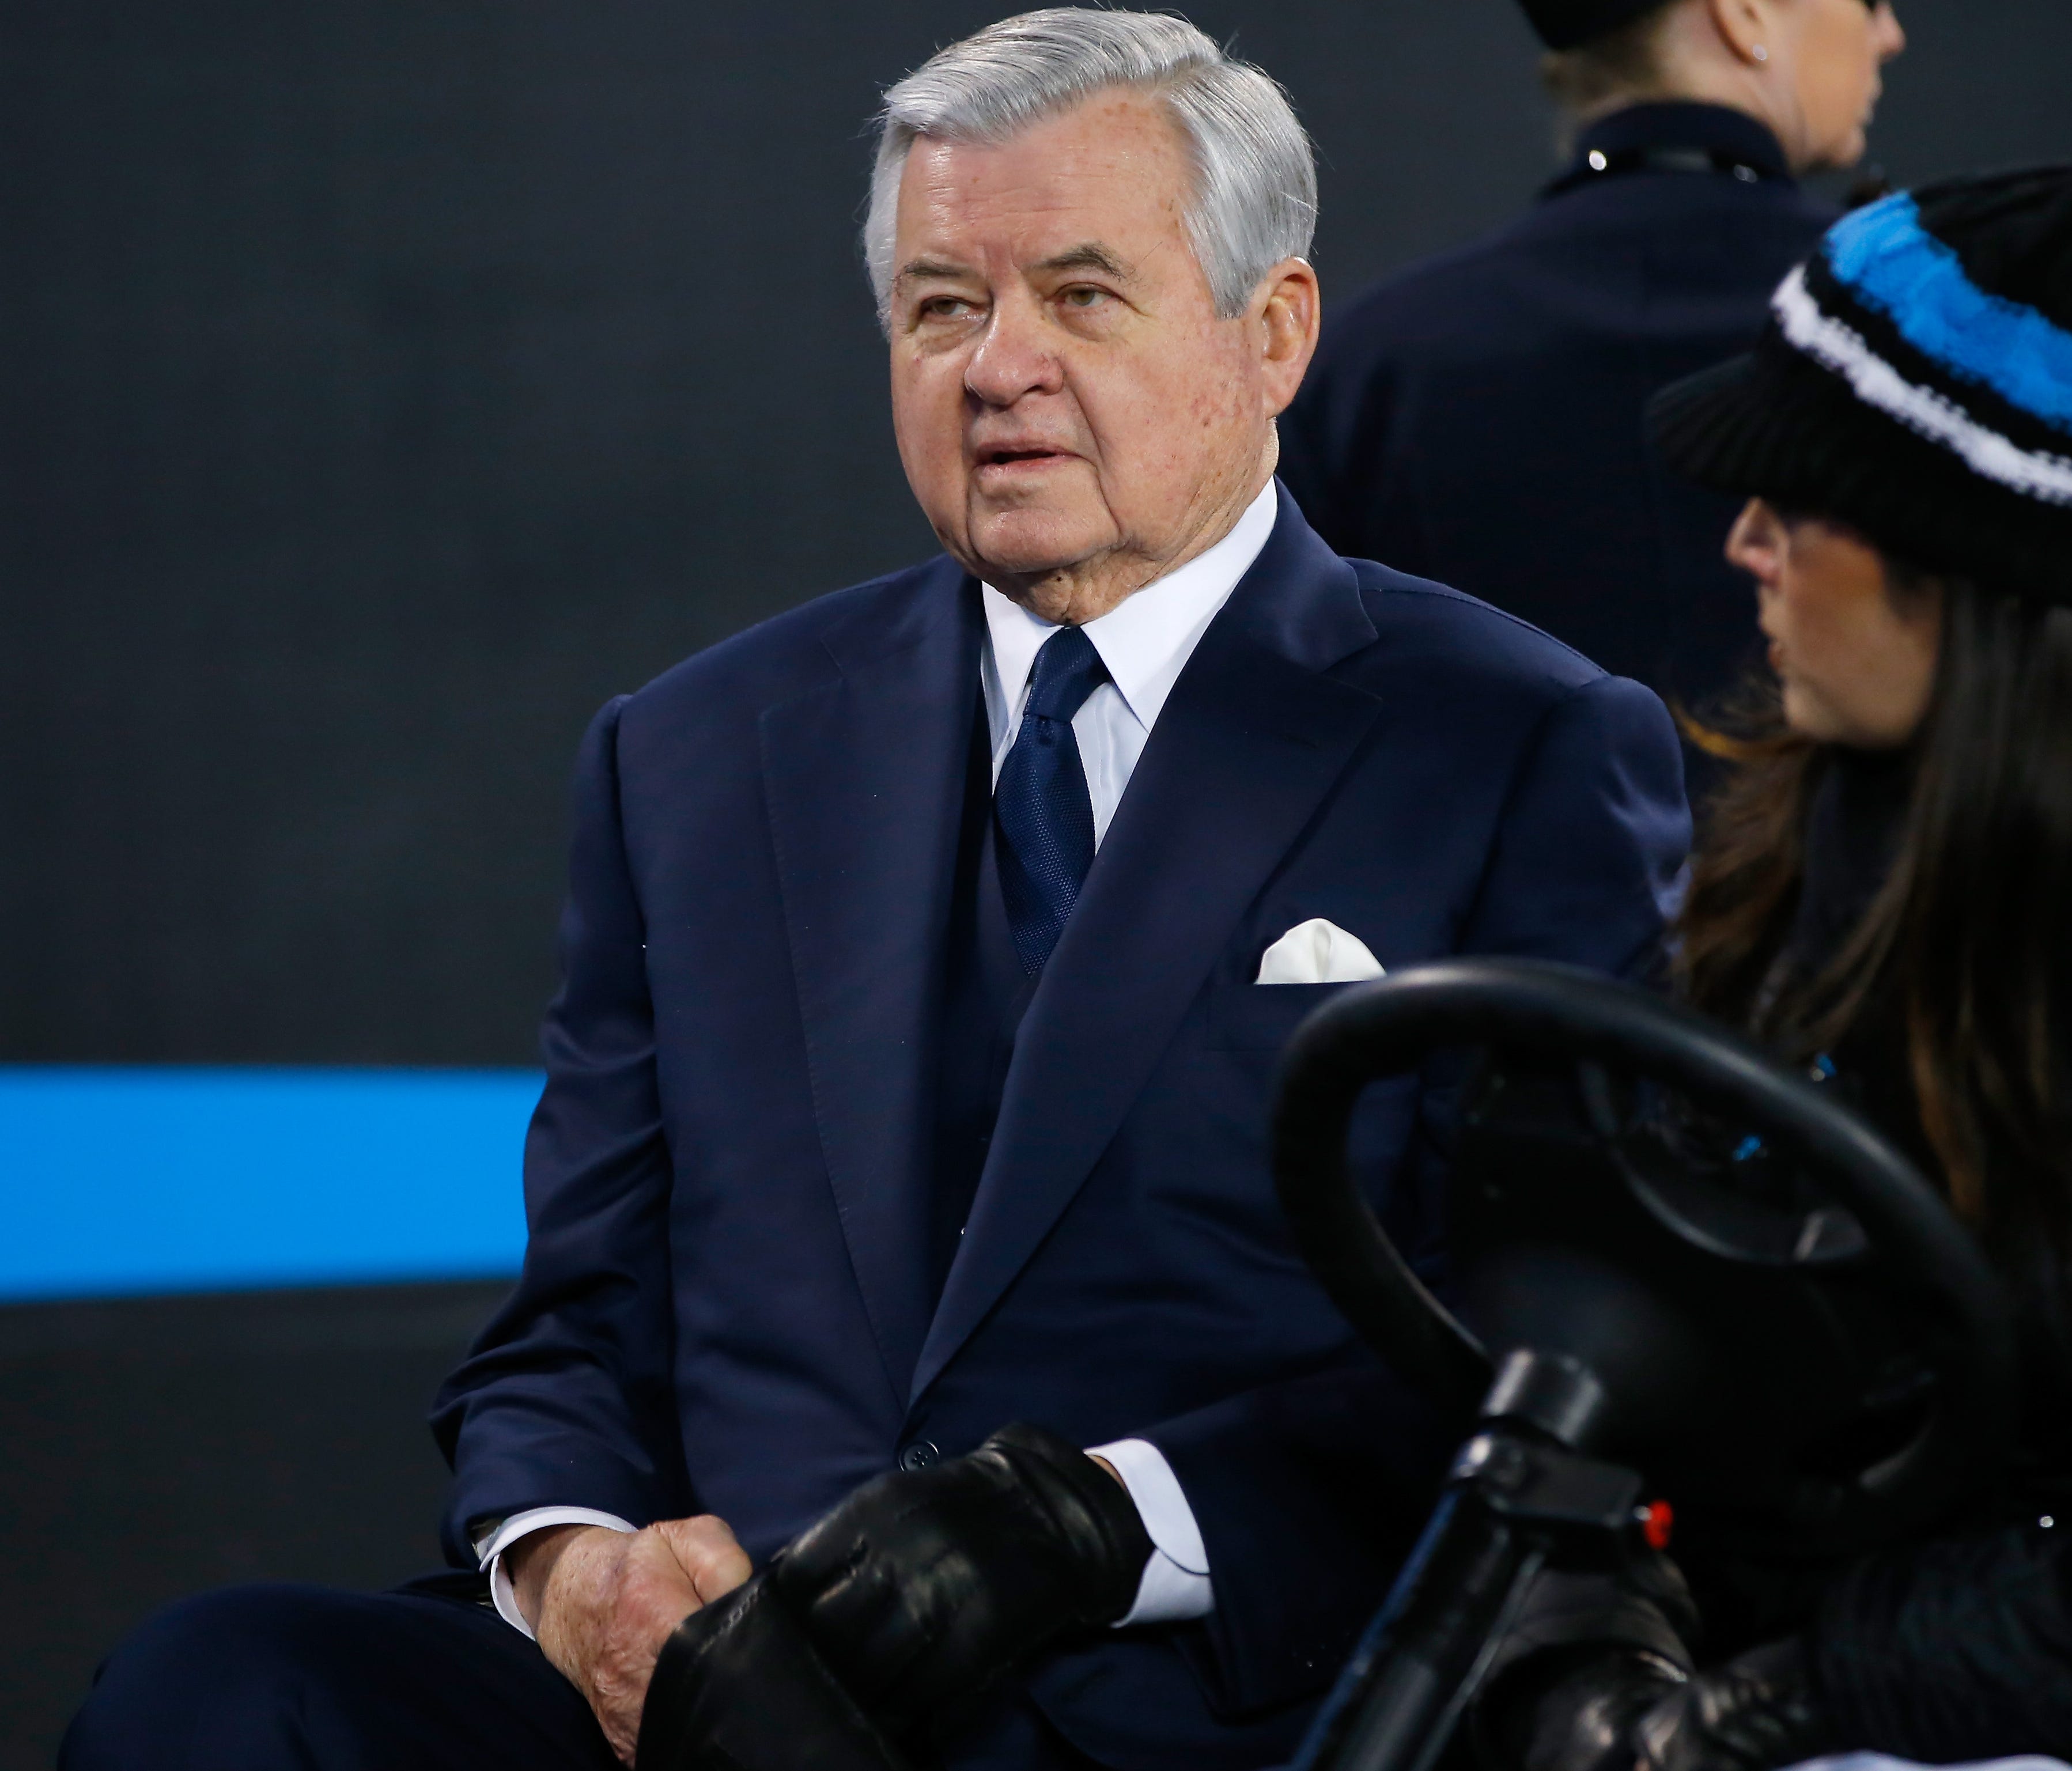 Panthers owner and founder Jerry Richardson will sell the team after the 2017 NFL season.